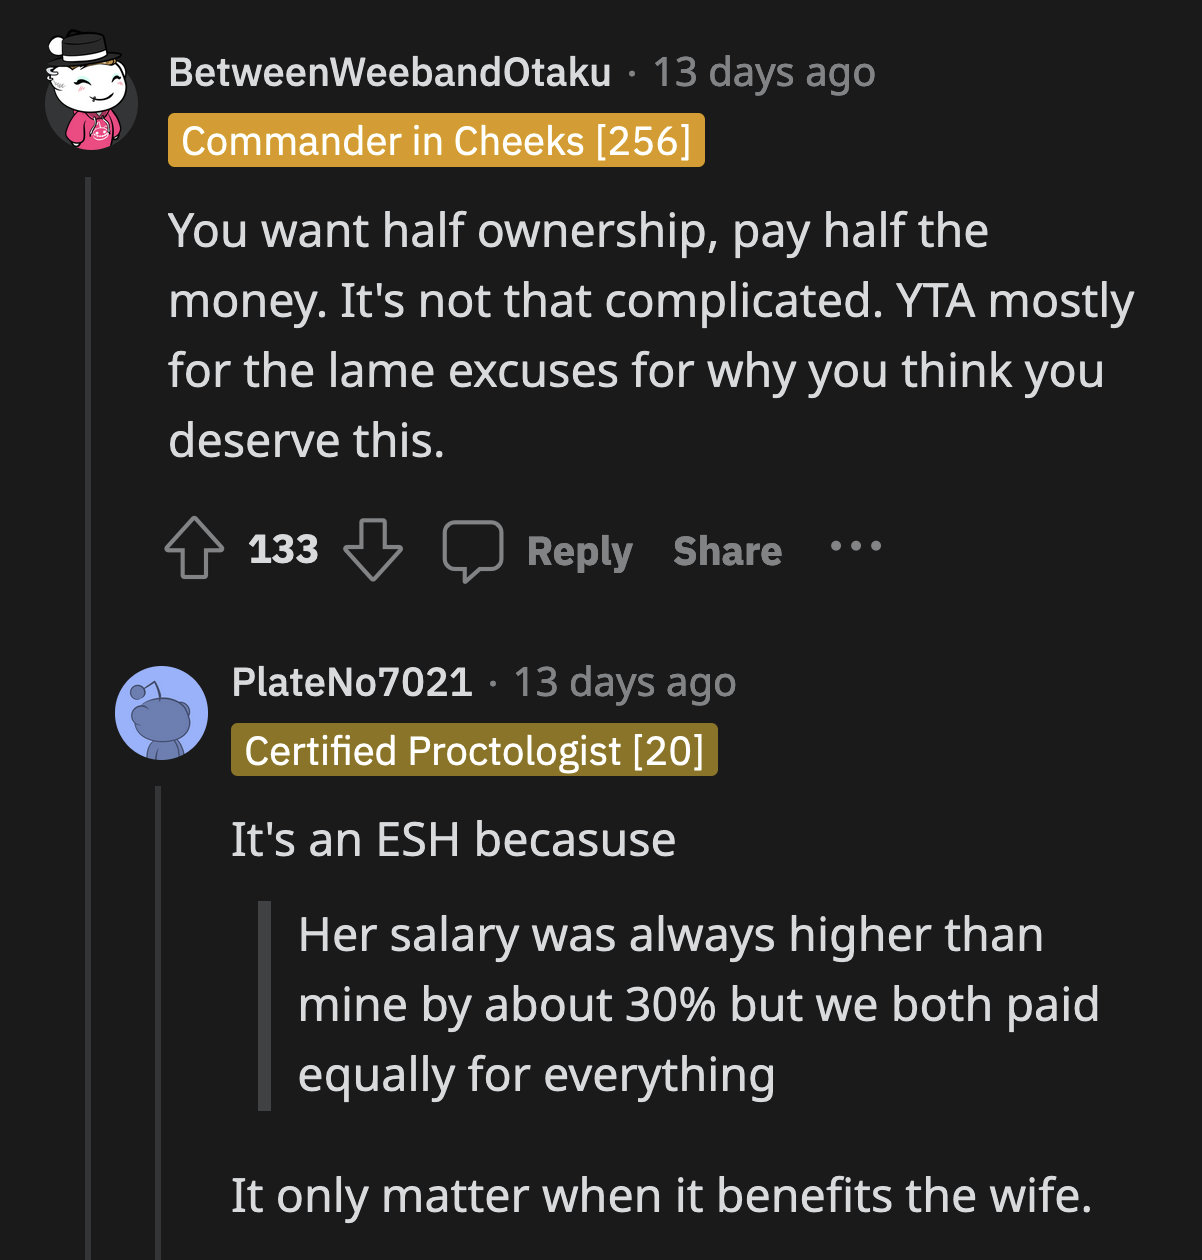 Others couldn't help but point out how his wife called for an equitable division when it benefitted her. She didn't feel the same when they split their bills down the middle all those years.